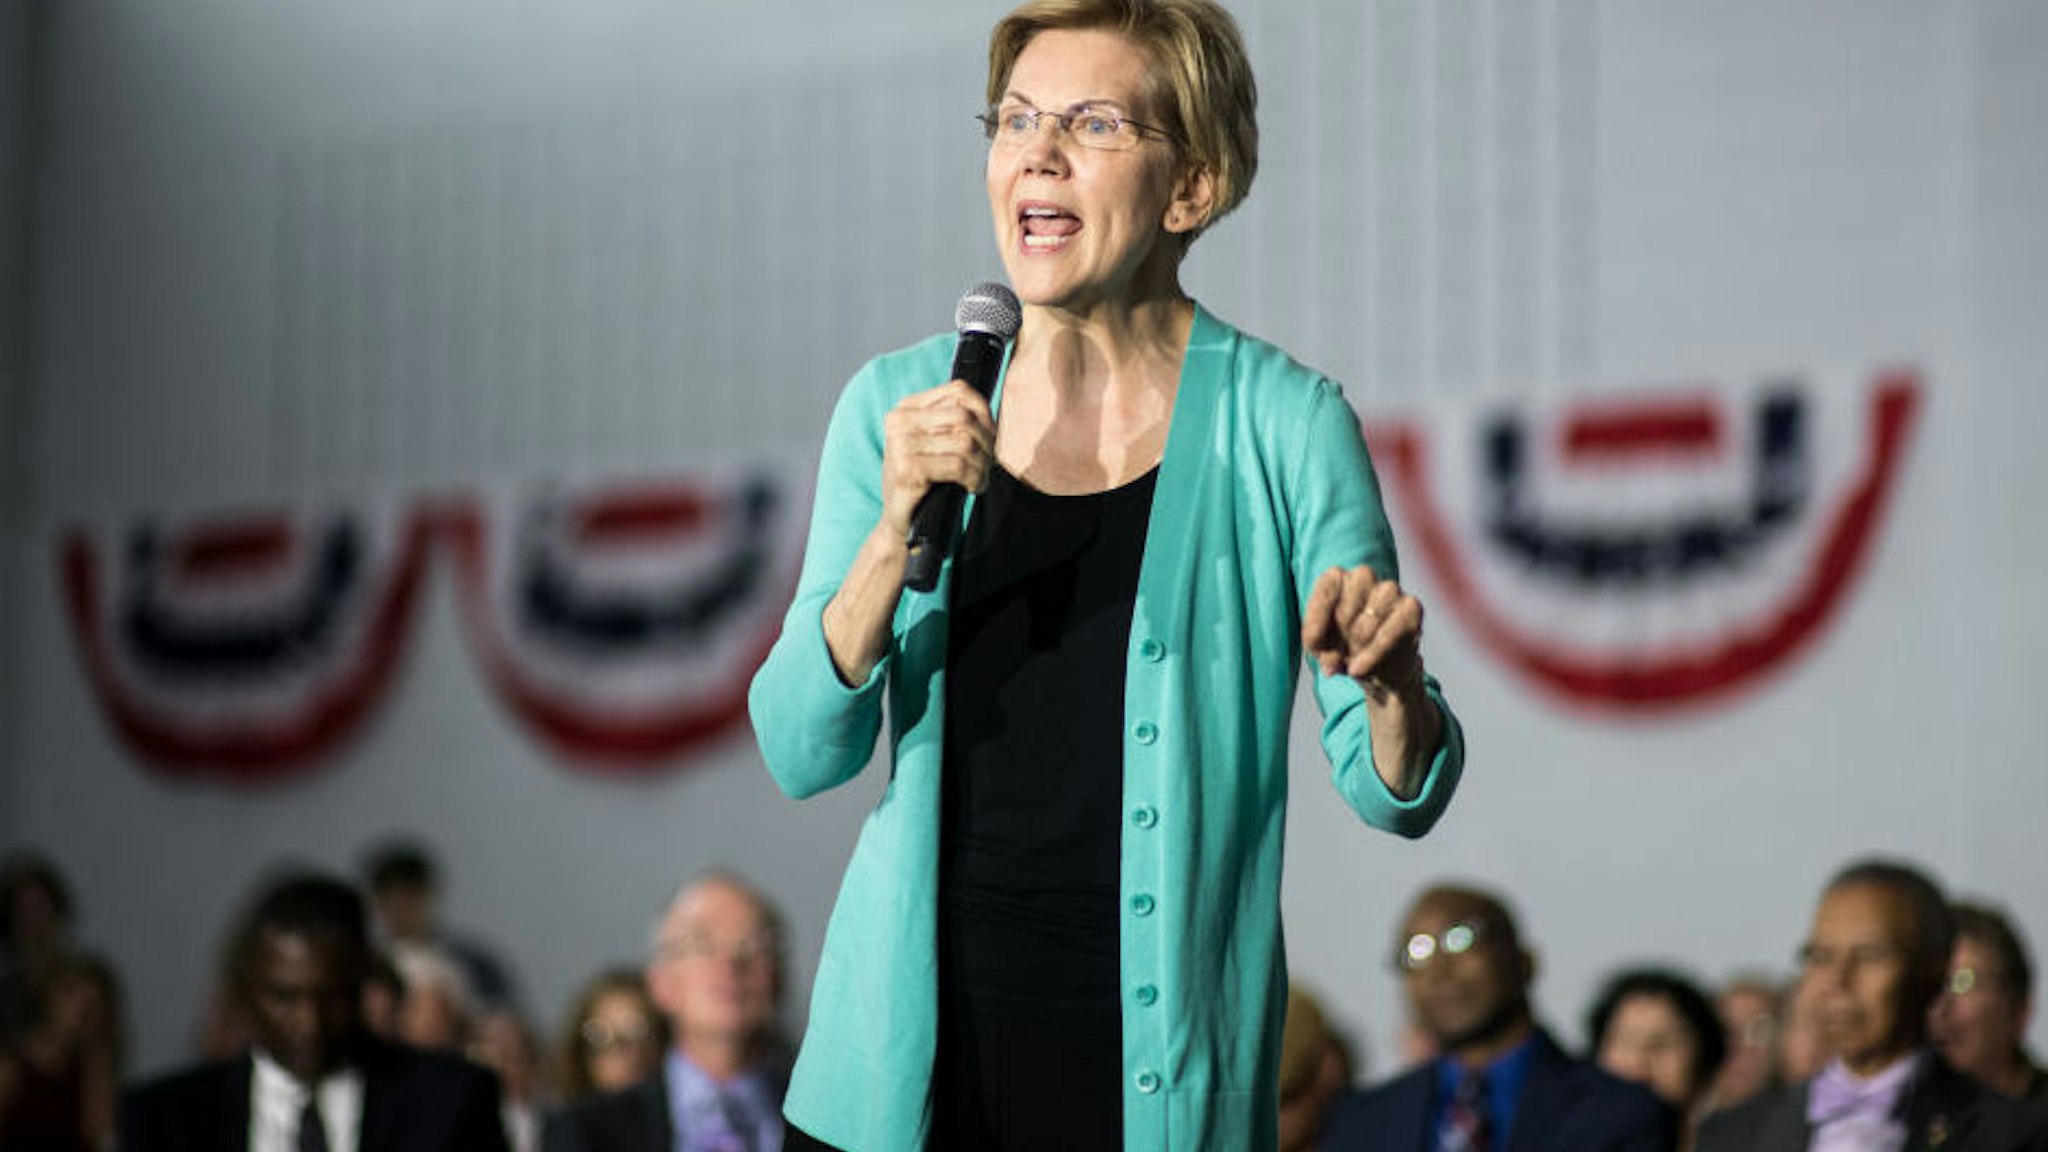 AIKEN, SC - AUGUST 17: Democratic presidential candidate, Sen. Elizabeth Warren (D-MA) addresses a crowd at a town hall event on August 17, 2019 in Aiken, South Carolina. Warren has held more than ten 2020 campaign events in the early primary state.